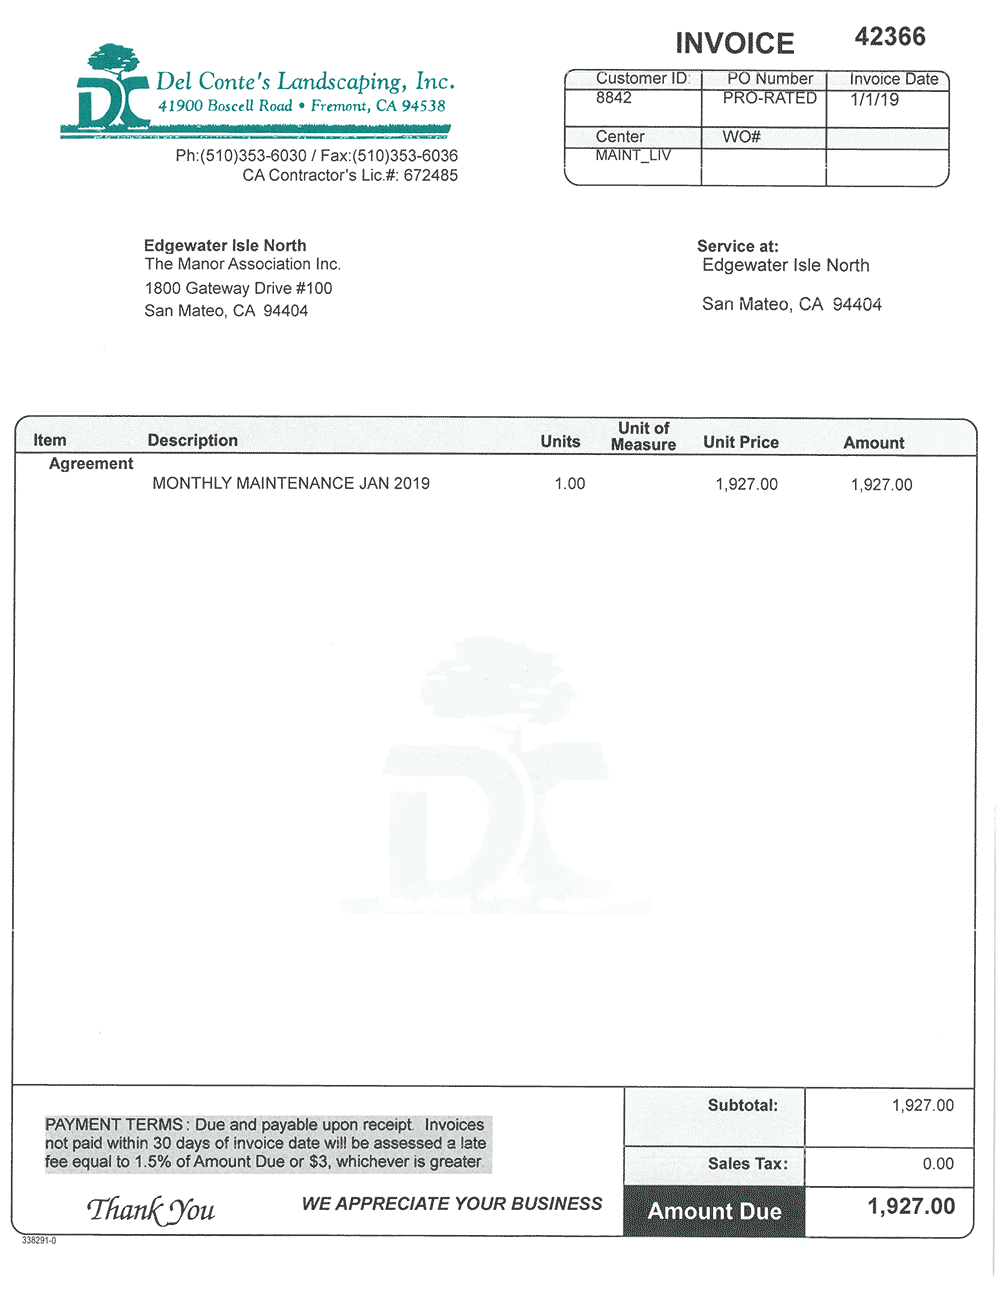 Del Conte's Landscaping has alleged that Edgewater Isle has not paid this invoice